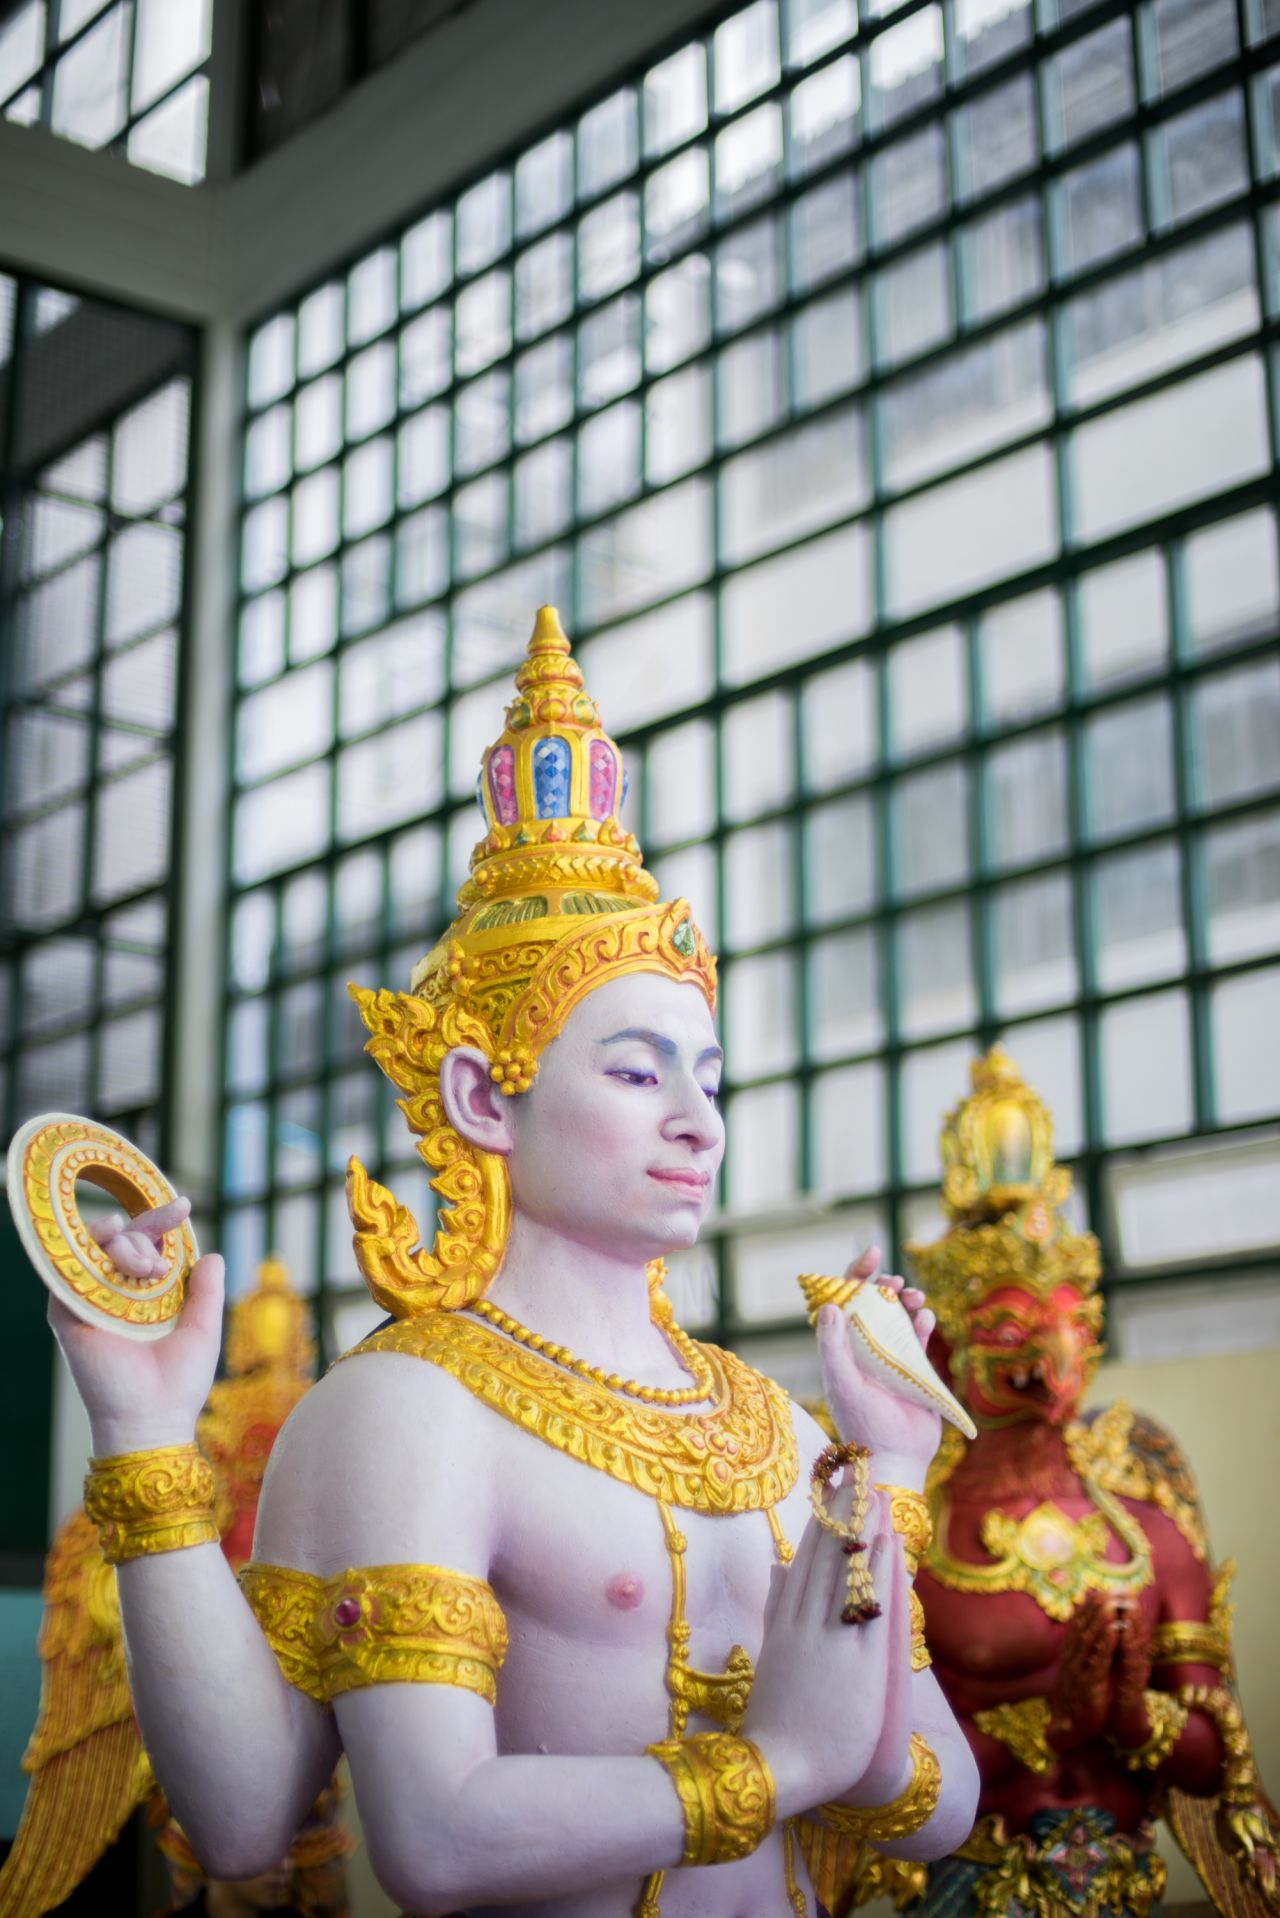 The artworks play an important role of the funeral of King Bhumibol, who possesses god-like status in Thailand. According to religious traditions, the ceremony will see the king complete his journey into the afterlife.